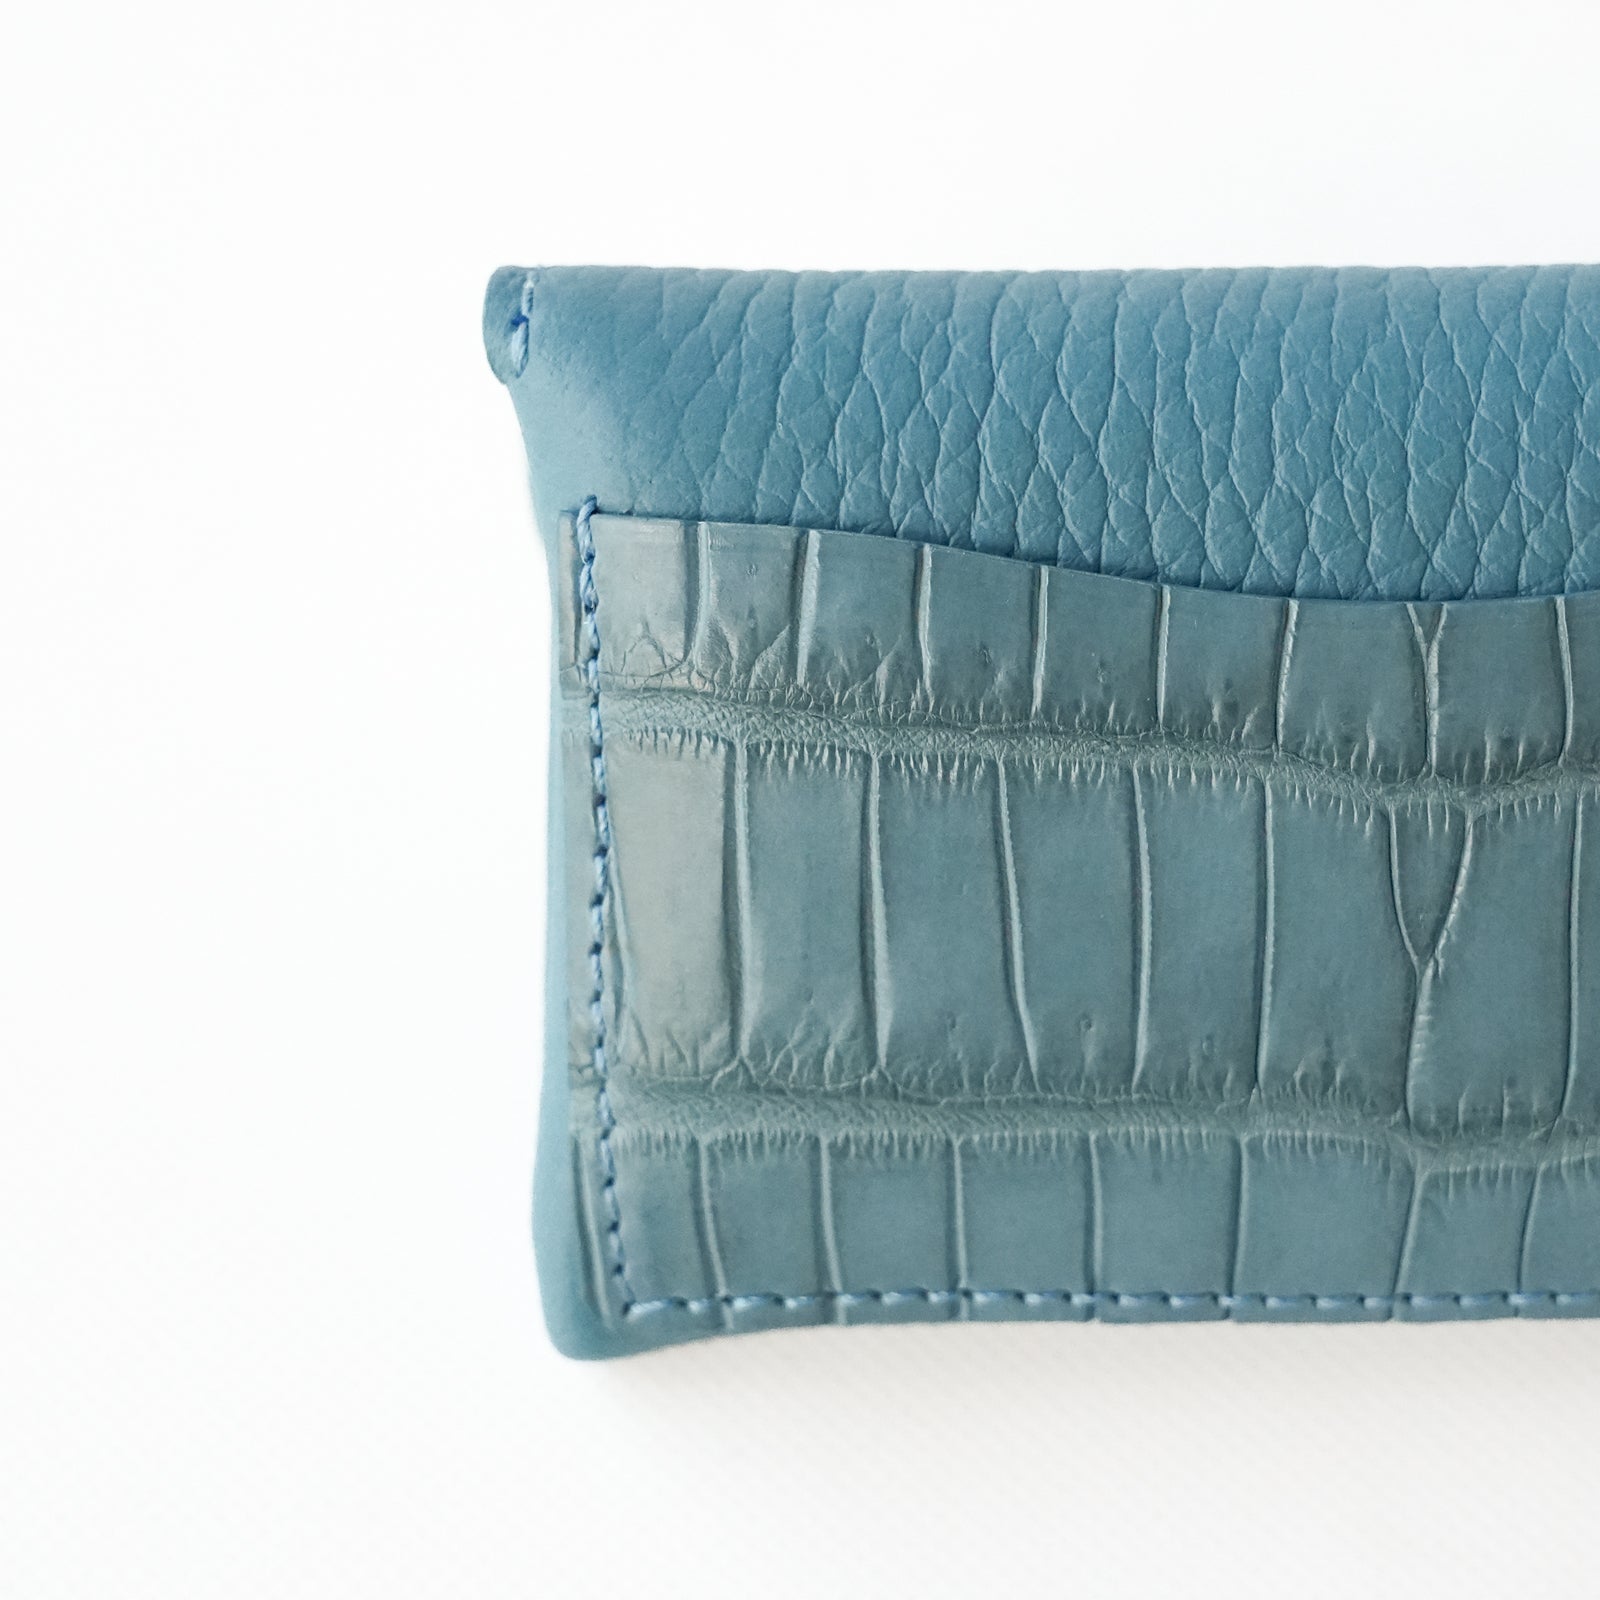 [6th Anniversary Sale] Soft leather flap mini wallet in Swift leather / Taurillon Clemence (crocodile pocket on the back)